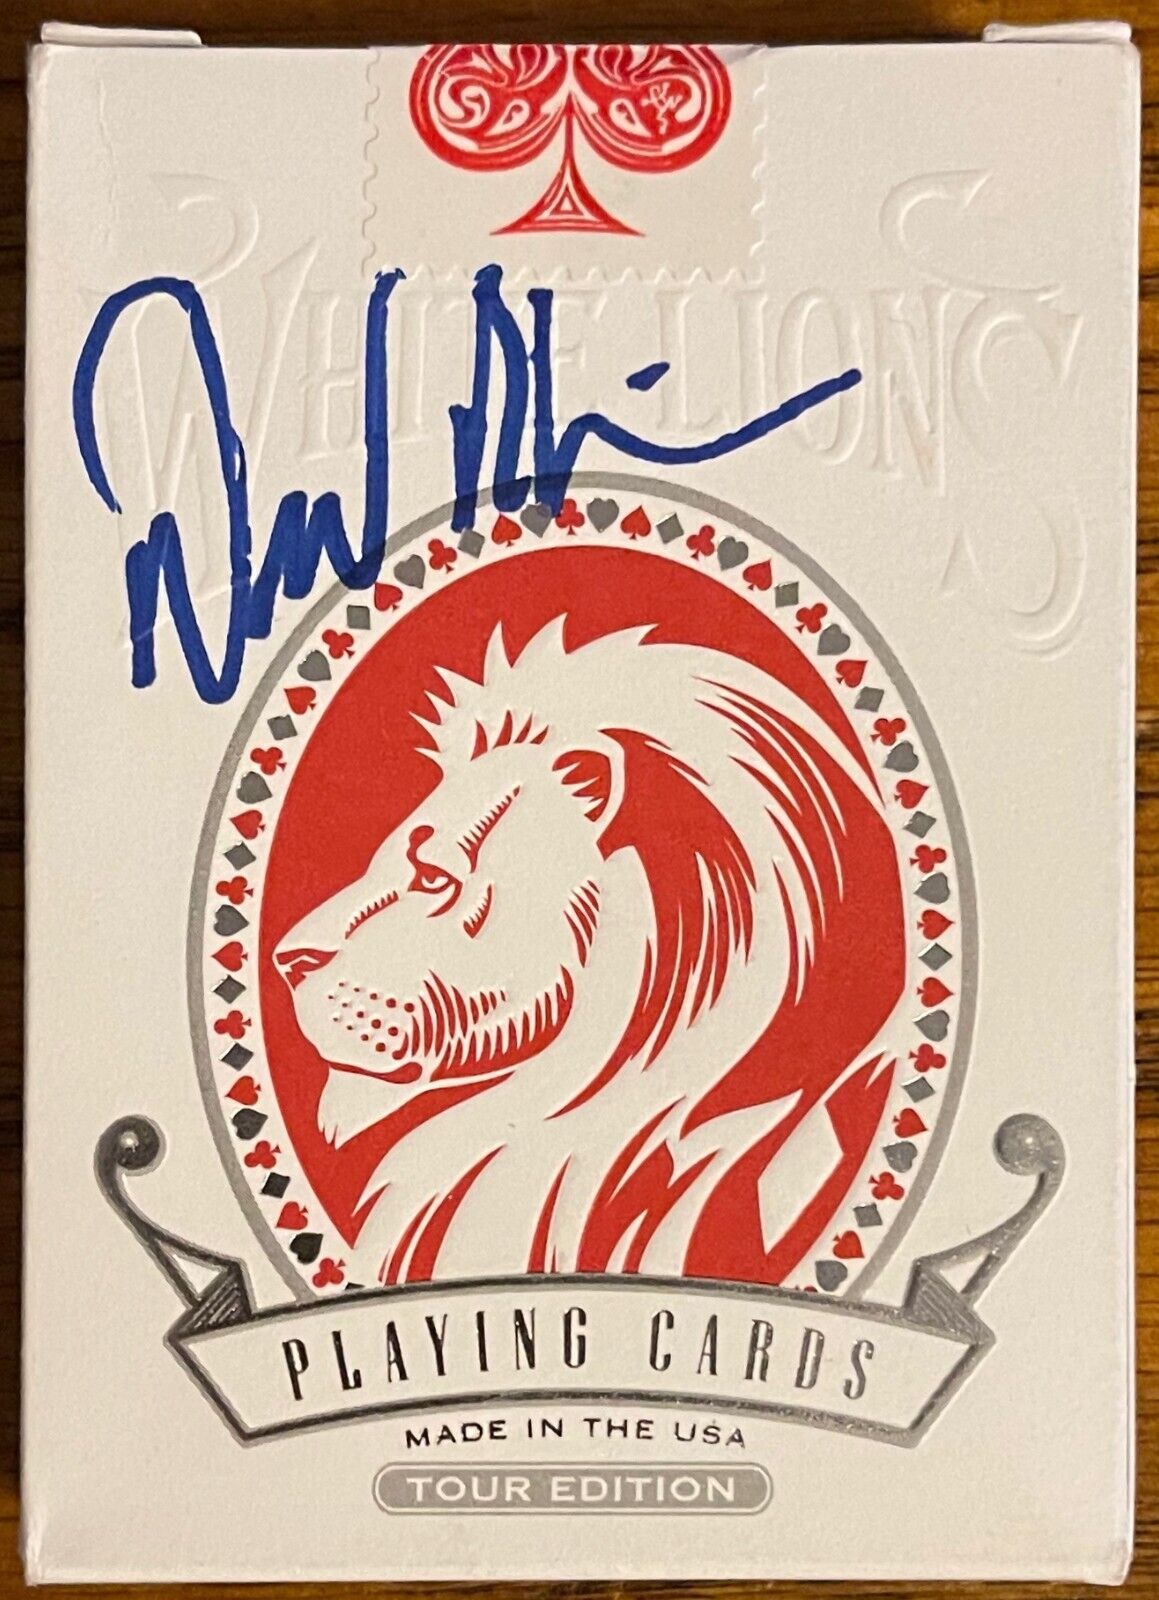 *SIGNED* - White Lions Tour Edition Red Playing Cards - David Blaine 2017